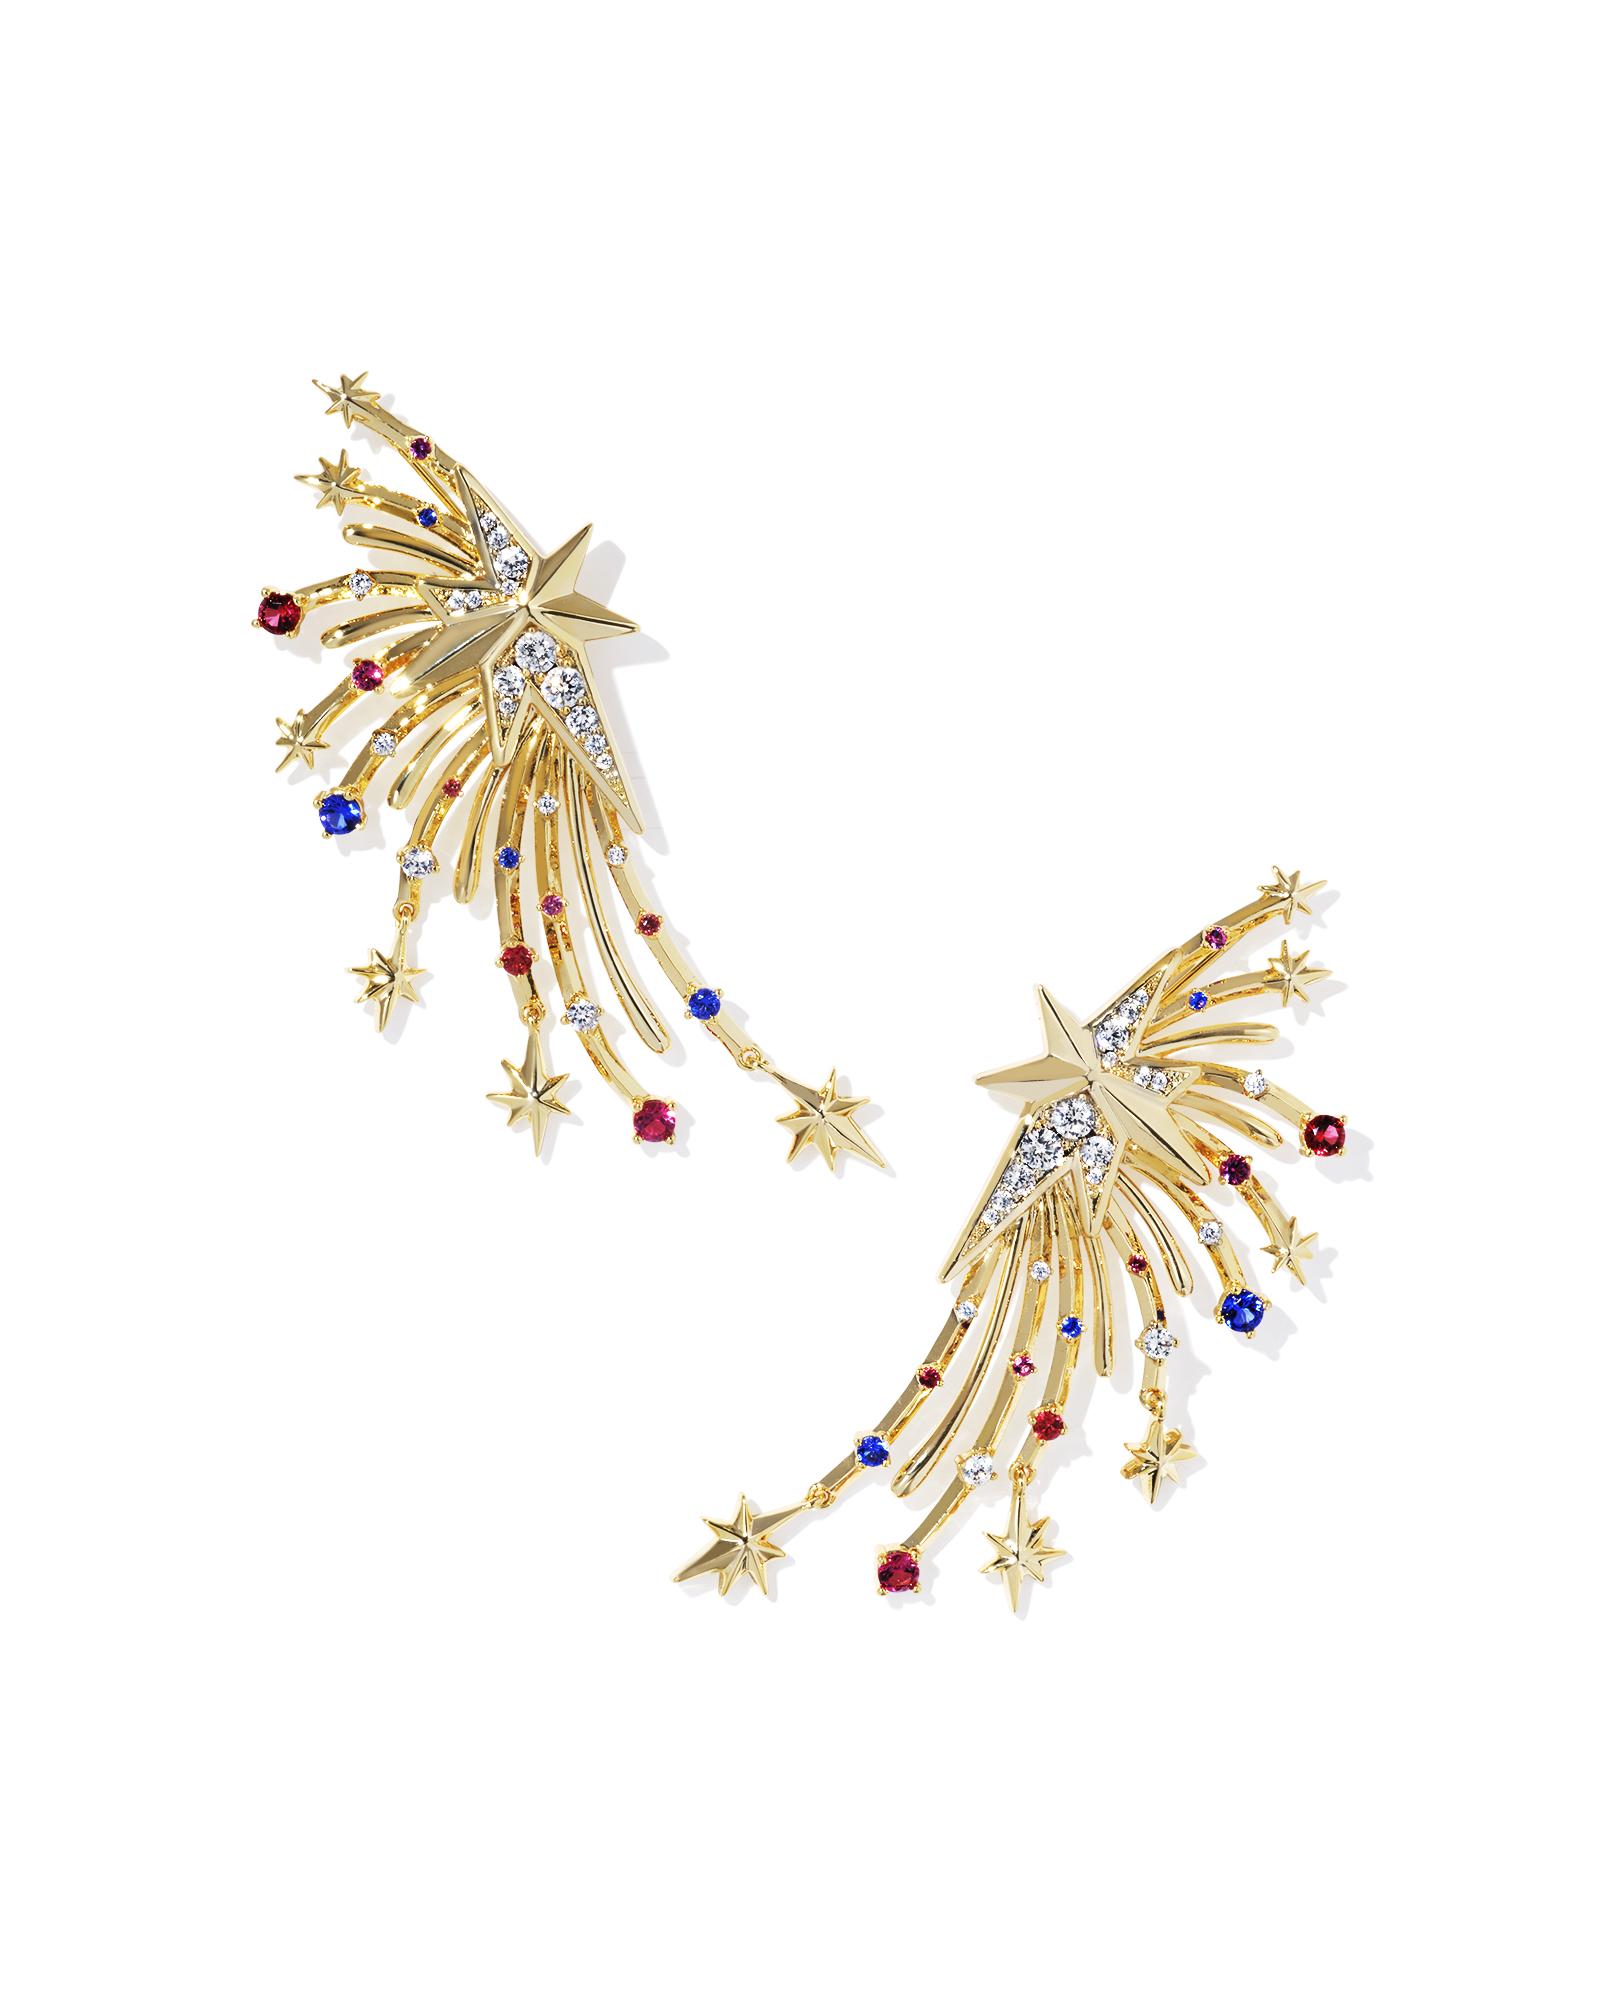 Firework Gold Statement Earrings in Red White Blue Mix